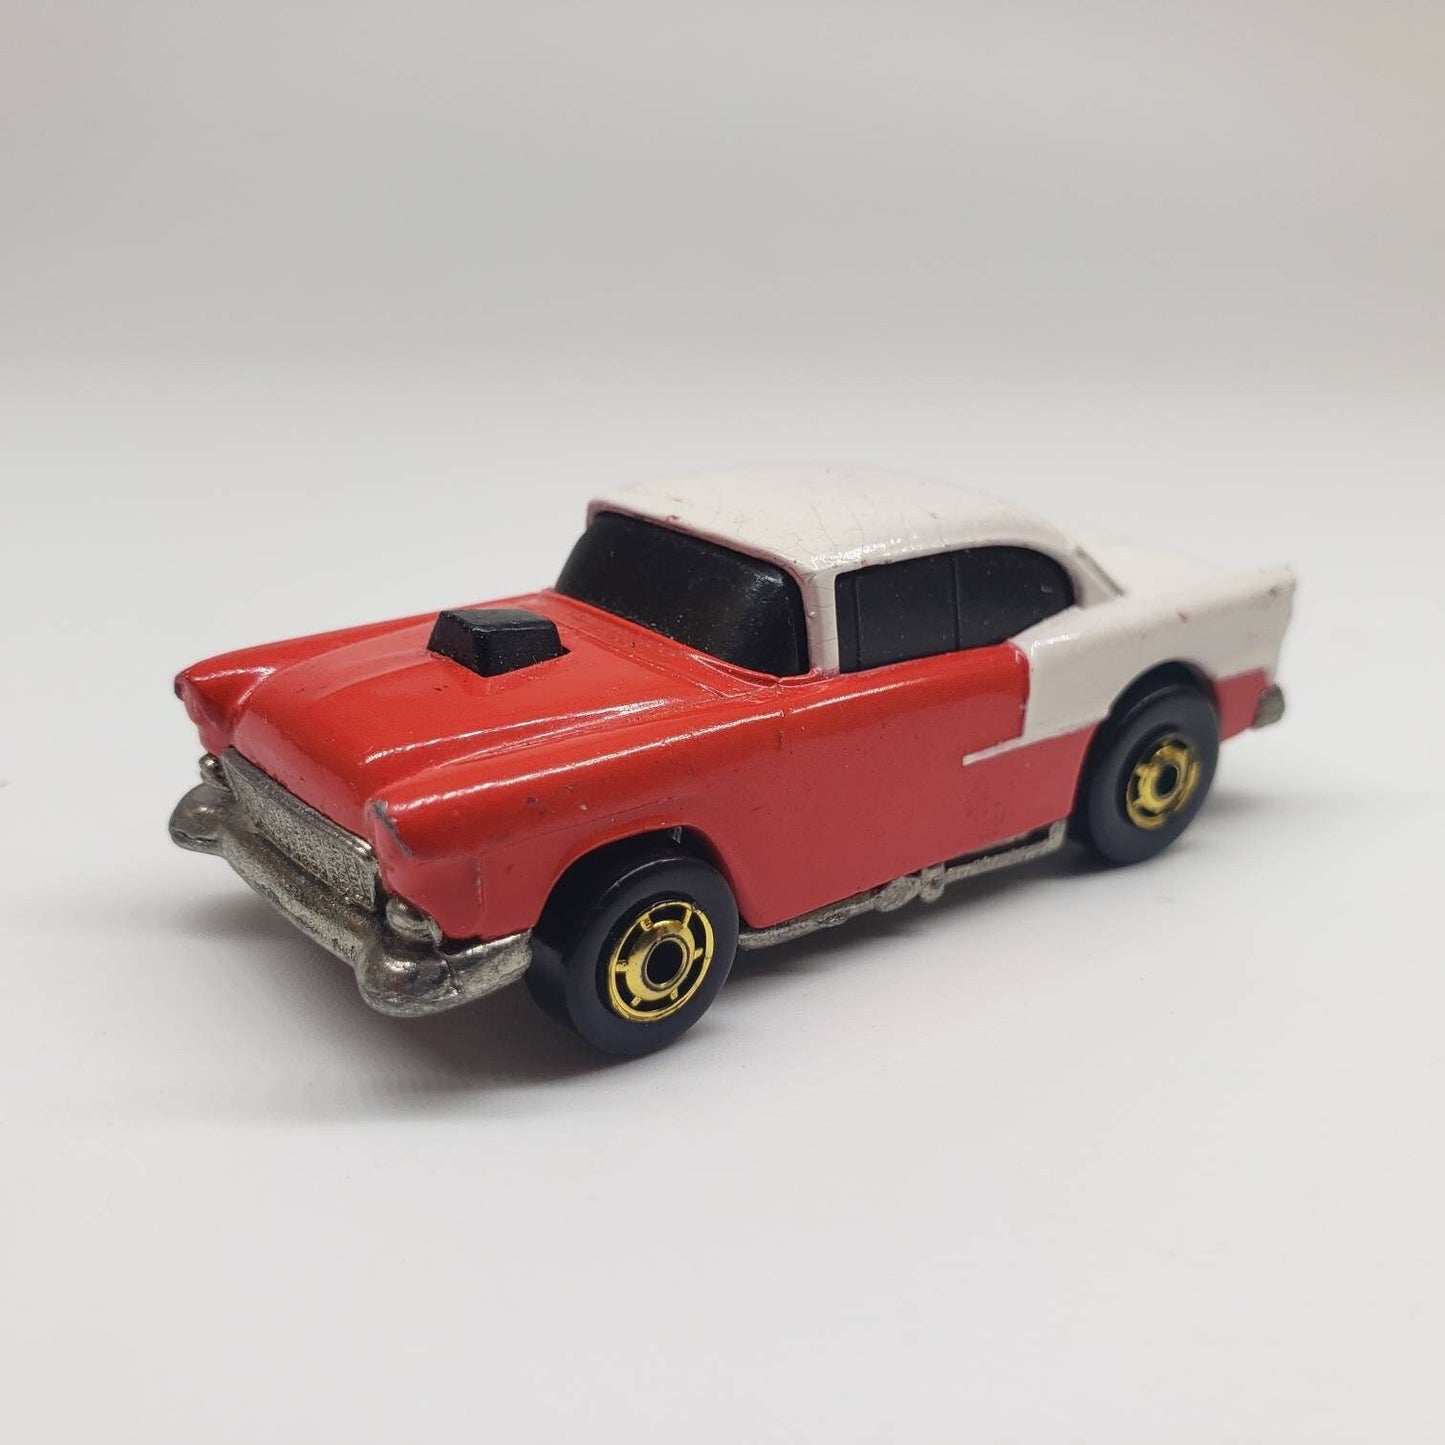 Hot Wheels '55 Chevy Red and White Mainline Perfect Birthday Gift Miniature Collectible Scale Model Toy Car